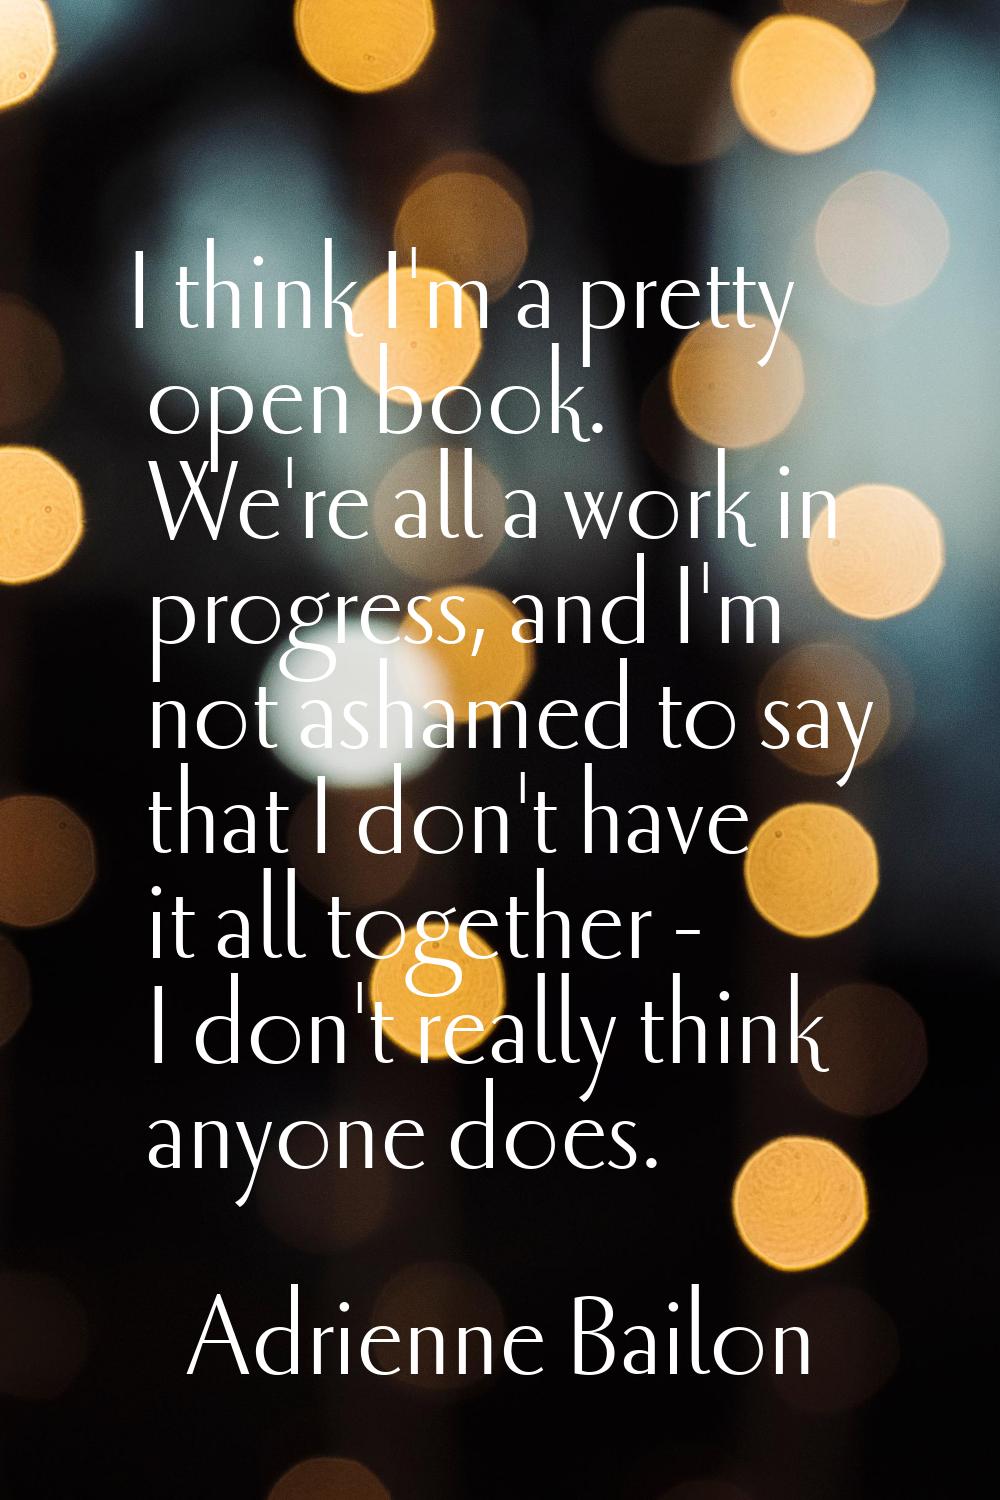 I think I'm a pretty open book. We're all a work in progress, and I'm not ashamed to say that I don